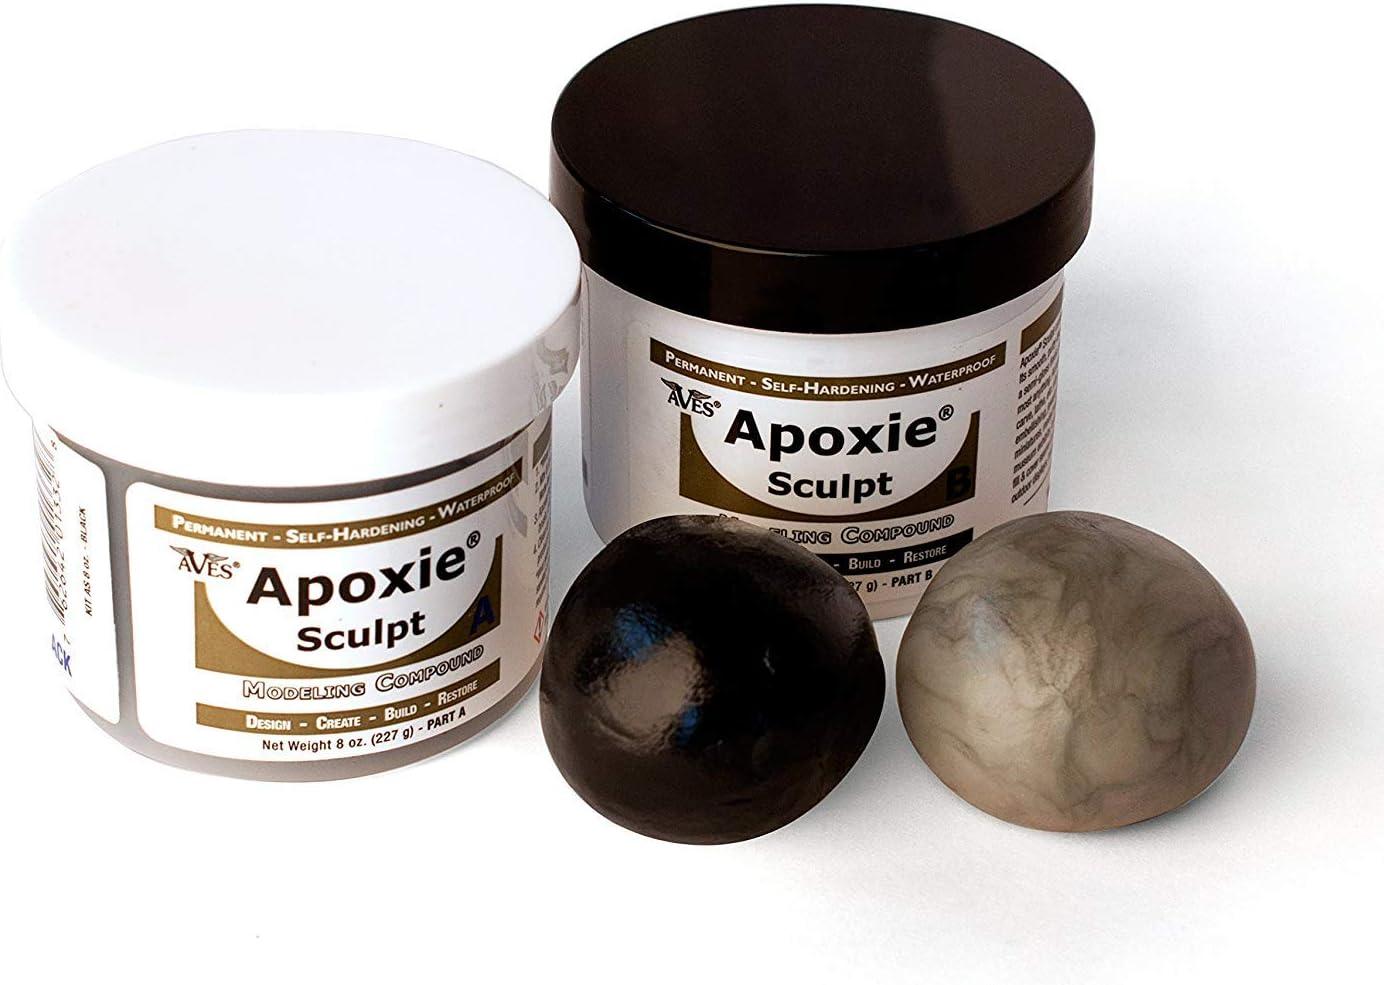 Apoxie Sculpt two-part epoxy modeling clay self-hardening 1lb